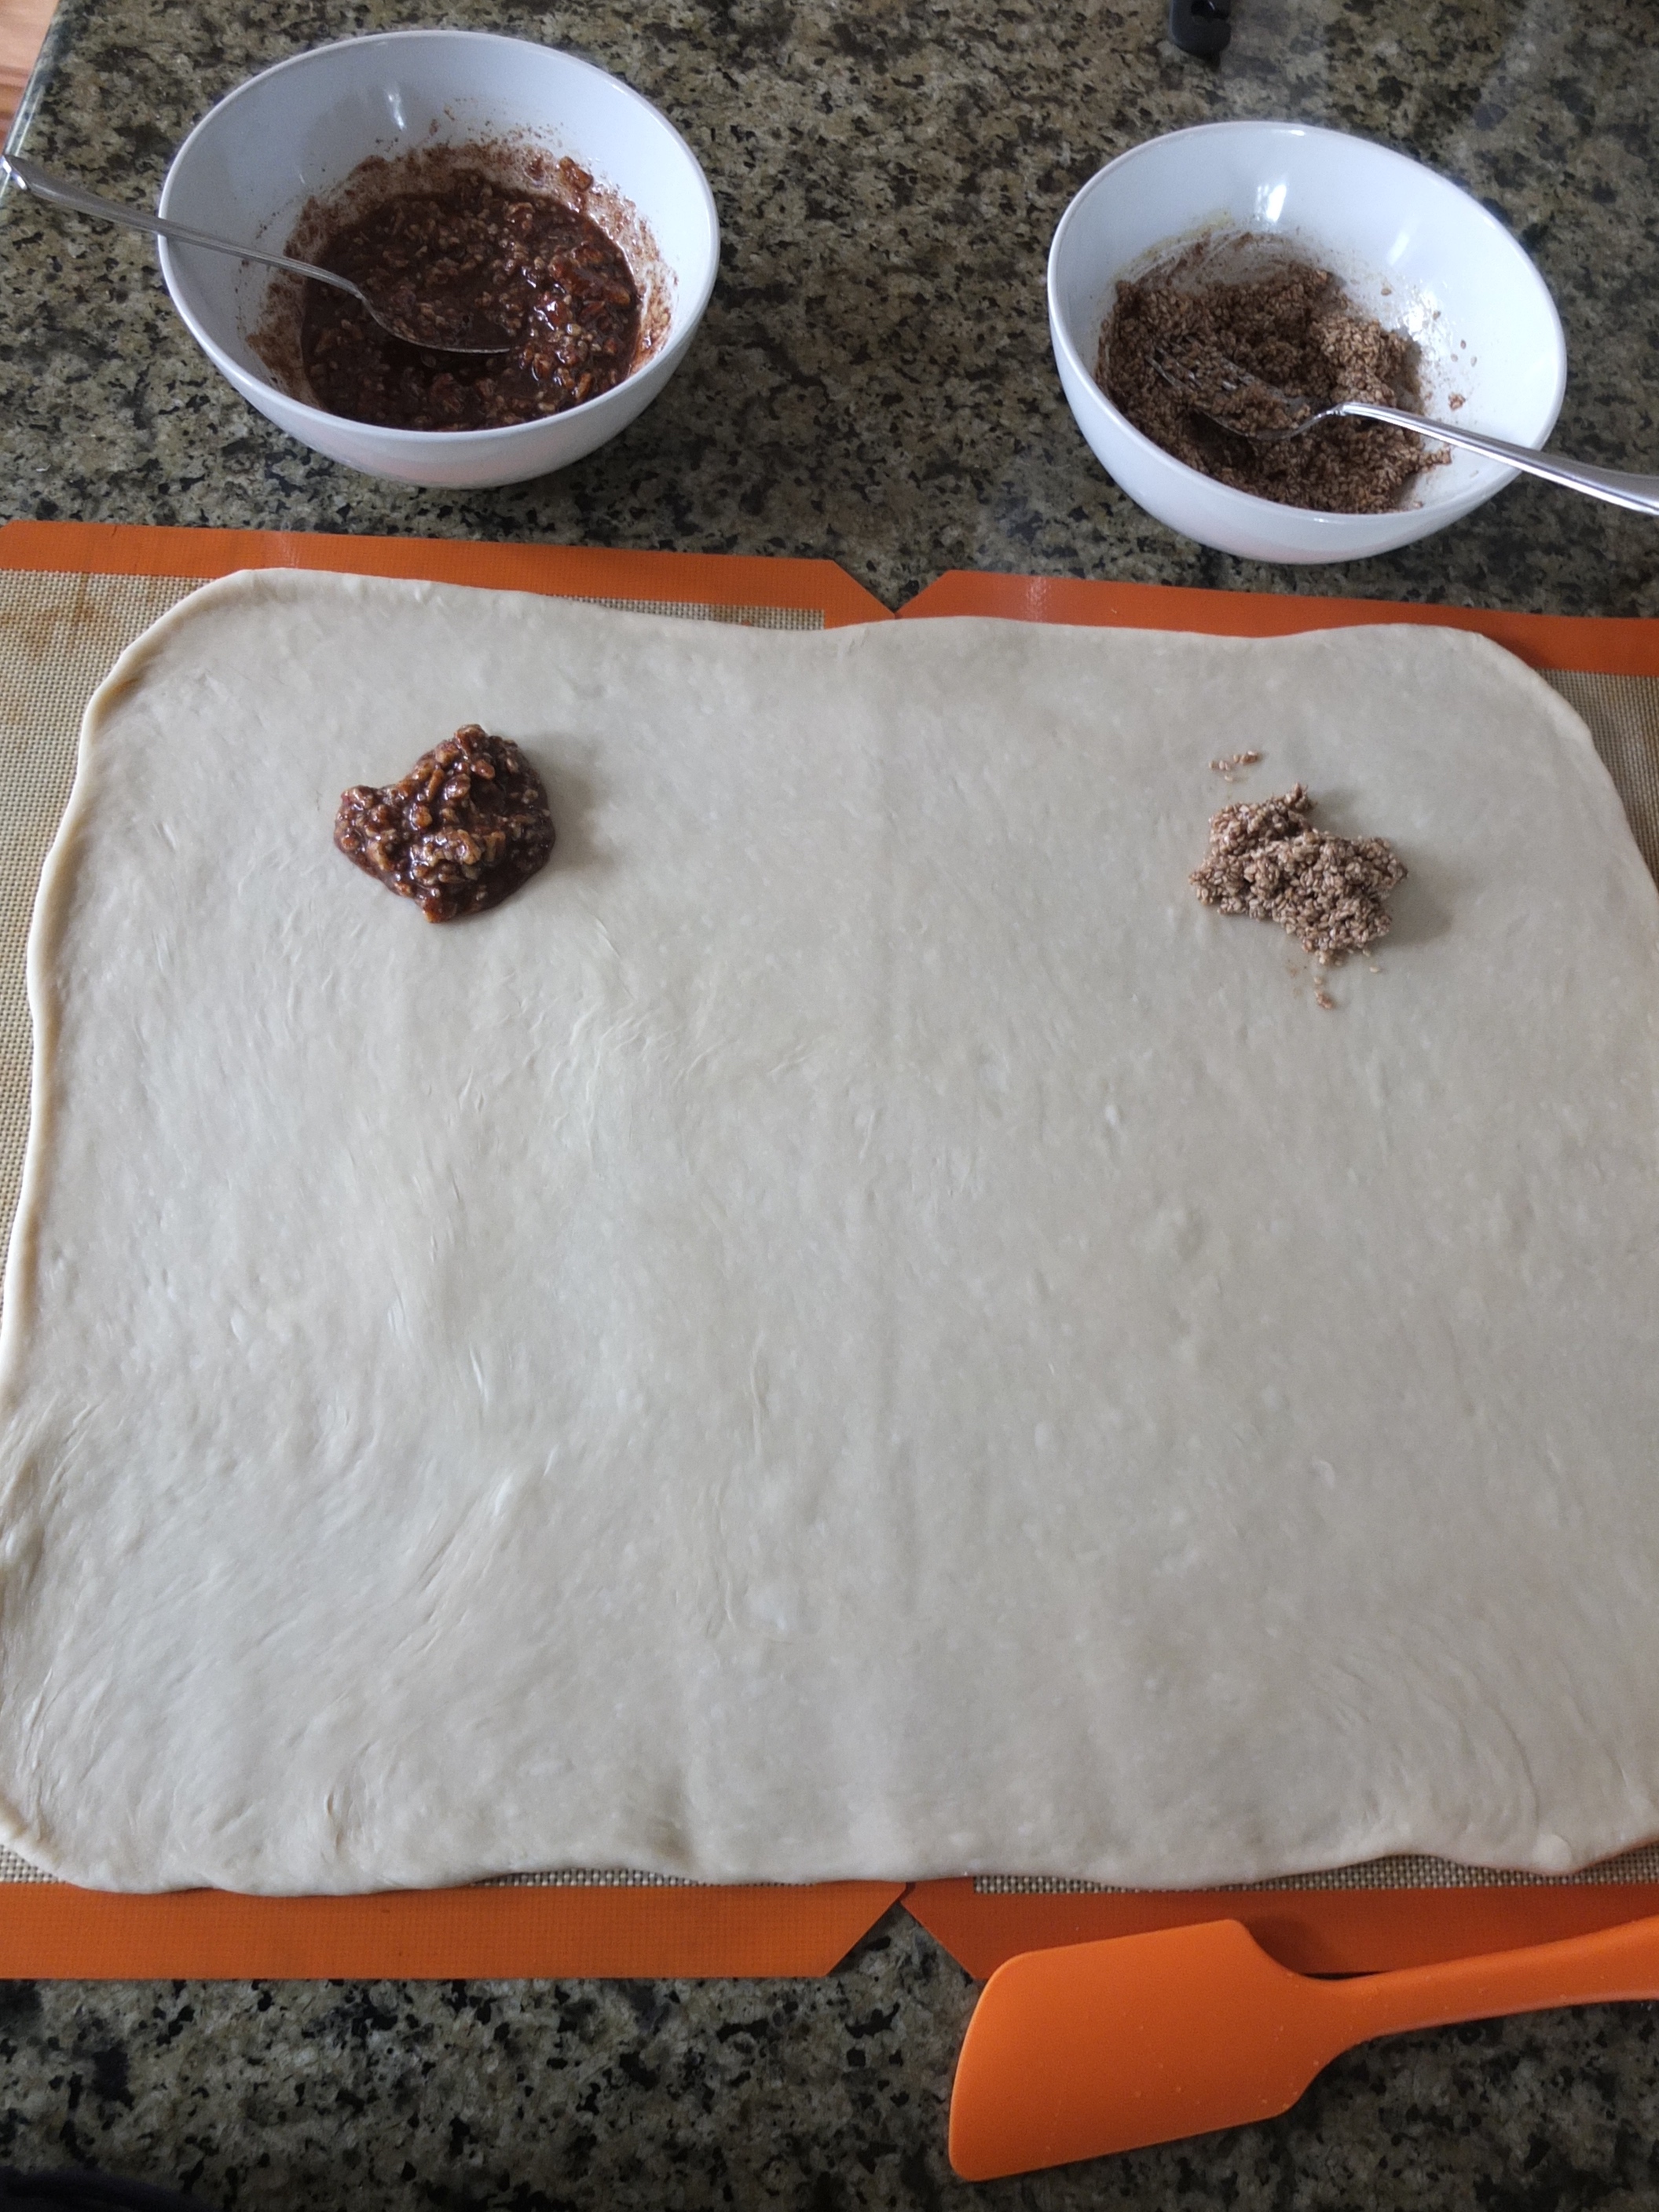 Rolled out dough before fillings for Sesame and Pecan Schnecken Rolls with Orange Glaze